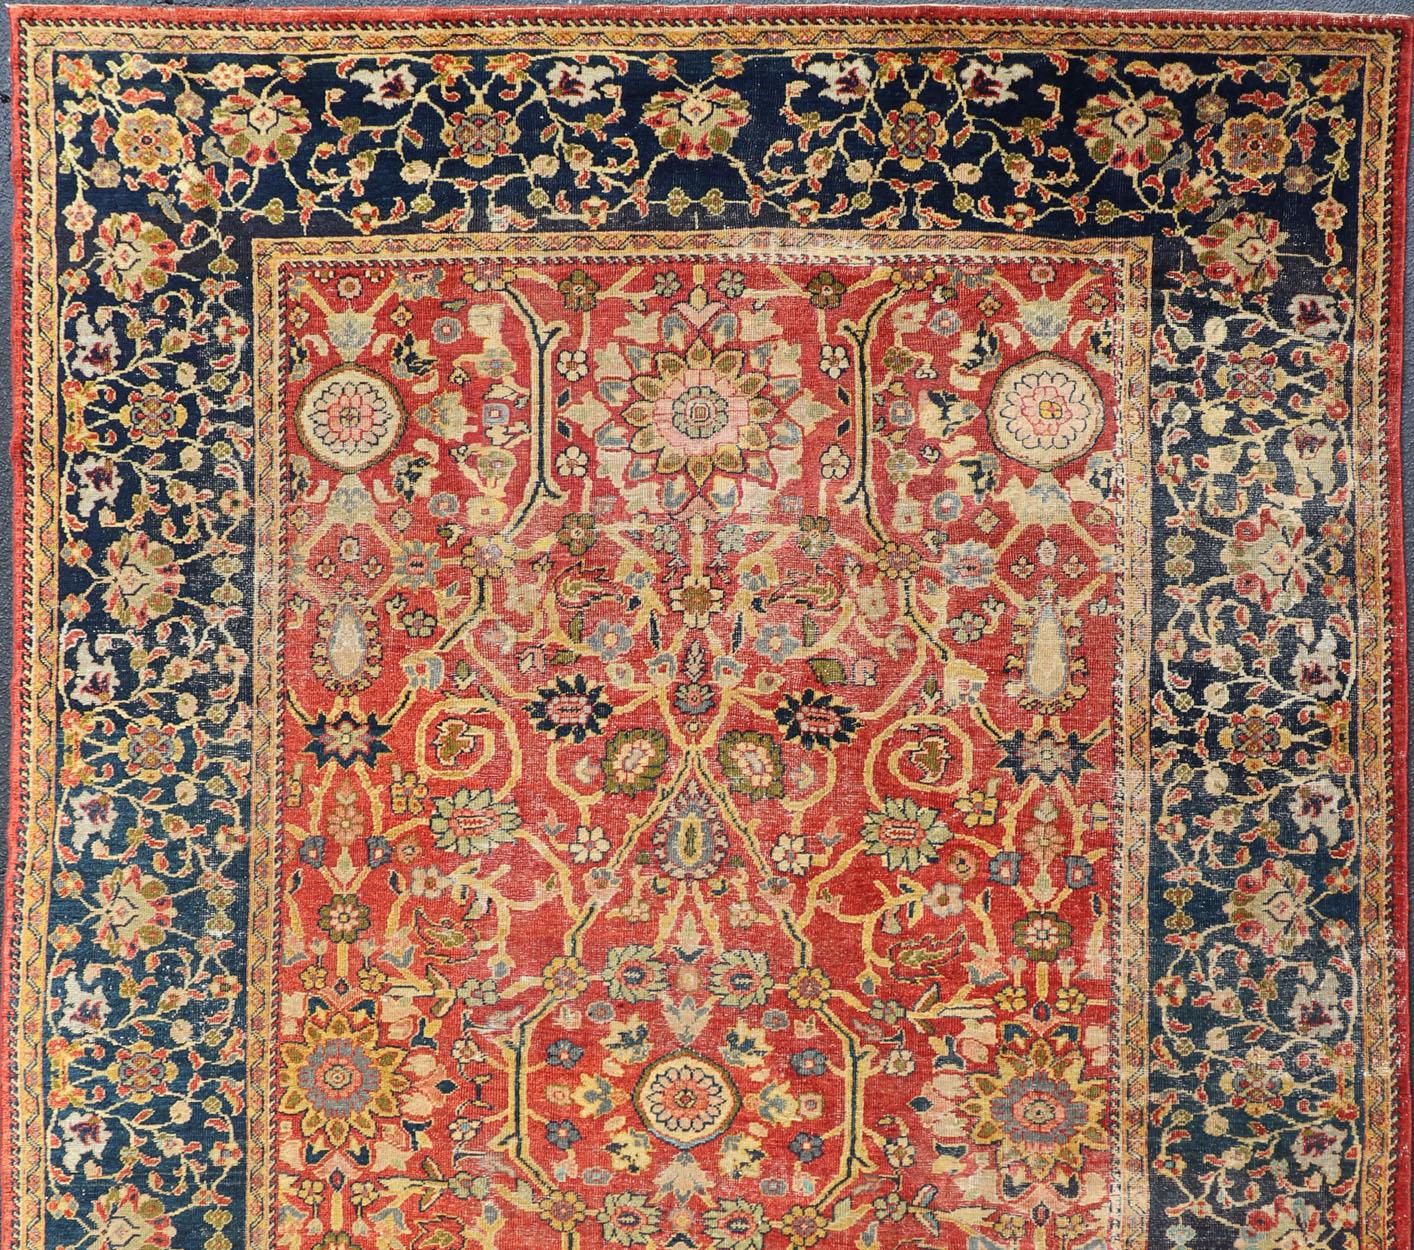 Charming & Colorful antique Persian Sultanabad rug in Rust, Blue, Gold, Yellow & Green Keivan Woven Arts/ Rug/ R20-0806


Measures: 8'1 x 13' 

Across the field of rust, a grand design of curling vines emits a splendid array of palmettes and